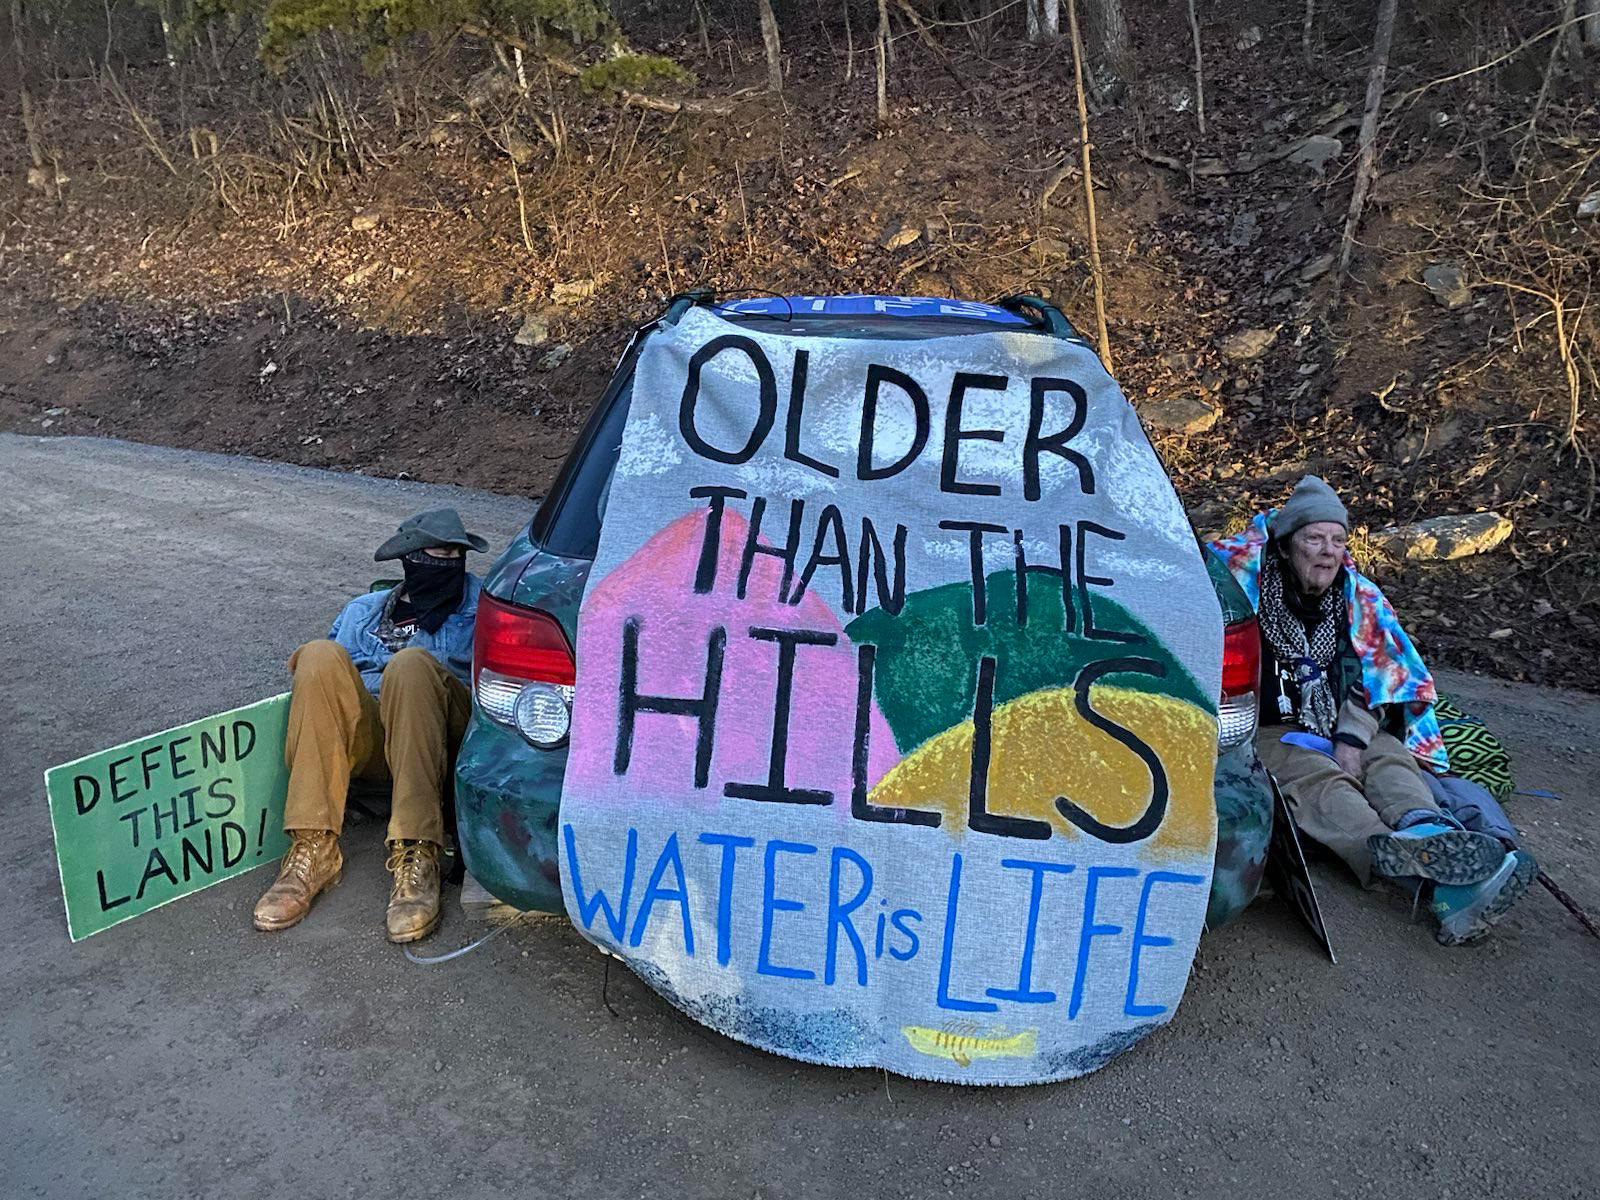 Pipeline opponents Andrew Hinz and Karen Bixler locked themselves to a broken-down car, blocking workers from accessing a construction site for the pipeline. Credit: Appalachians Against Pipelines